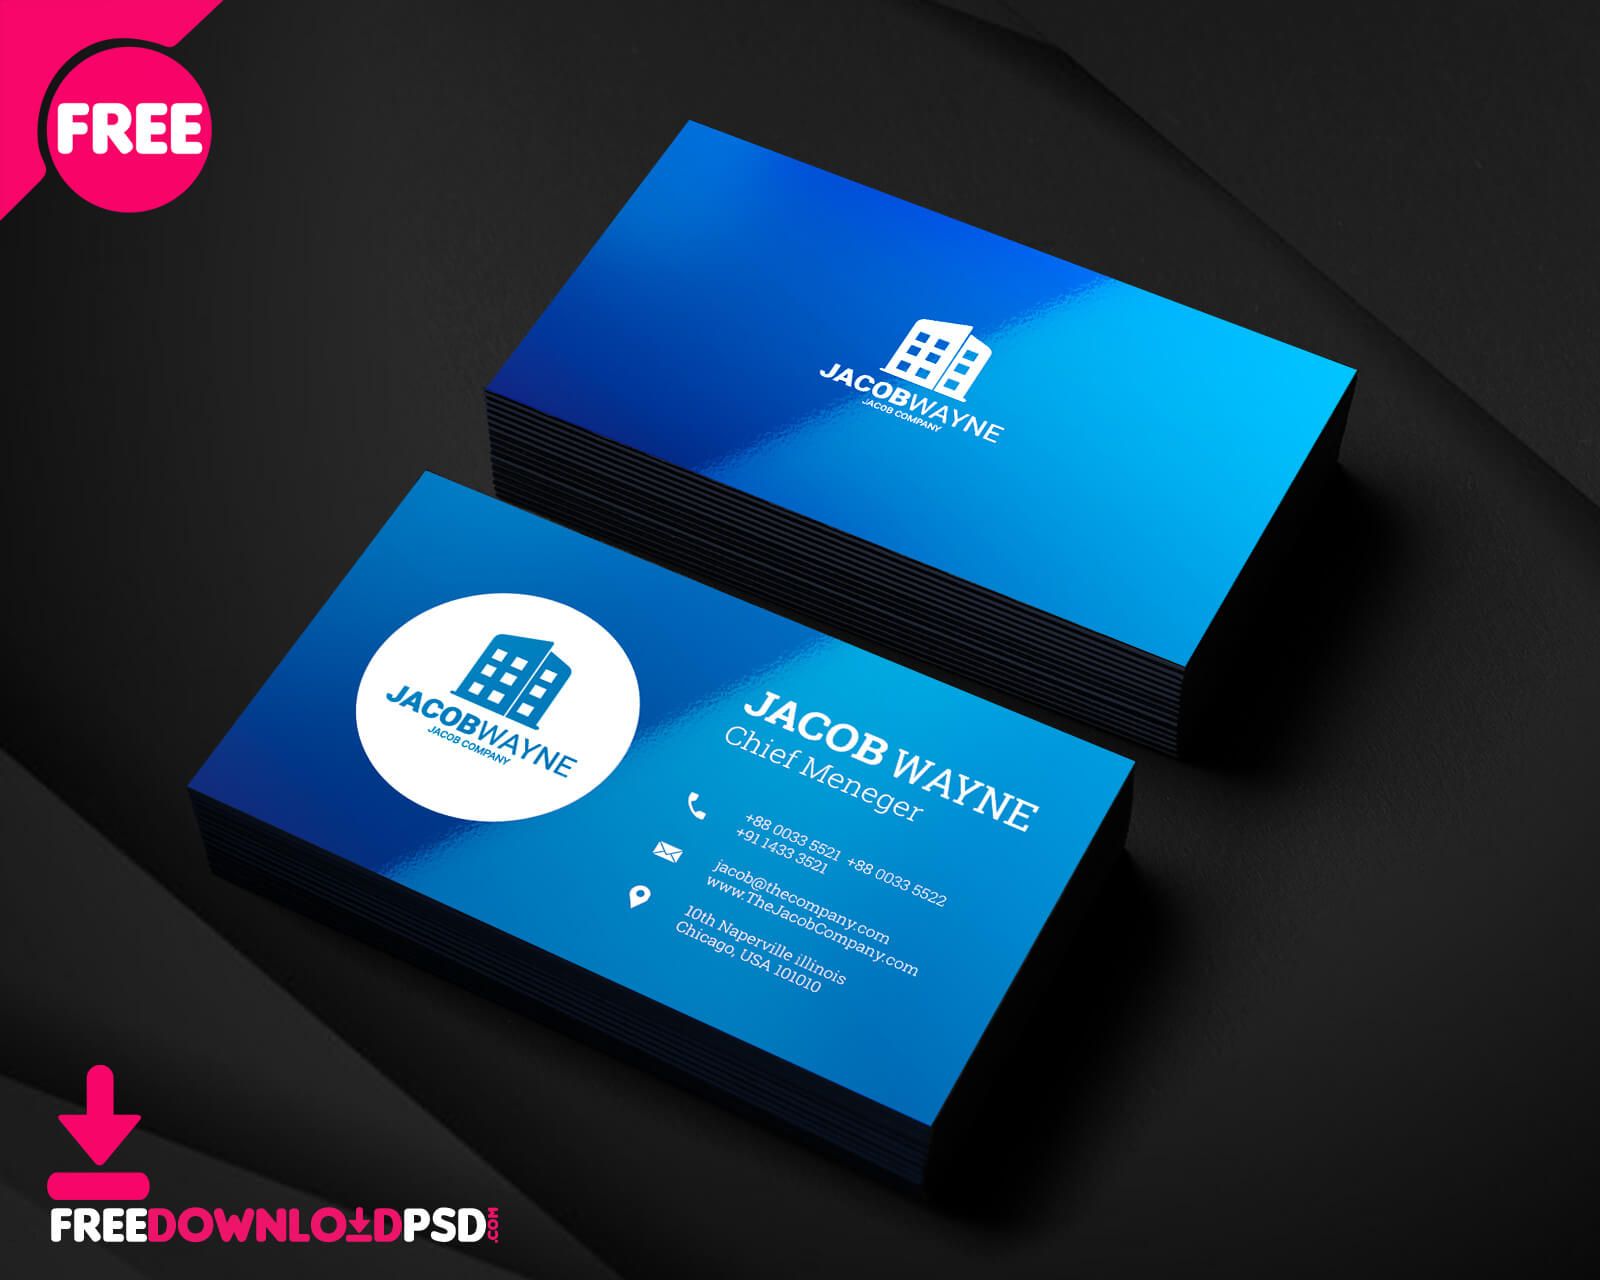 Real Estate Business Card Psd | Freedownloadpsd Within Visiting Card Psd Template